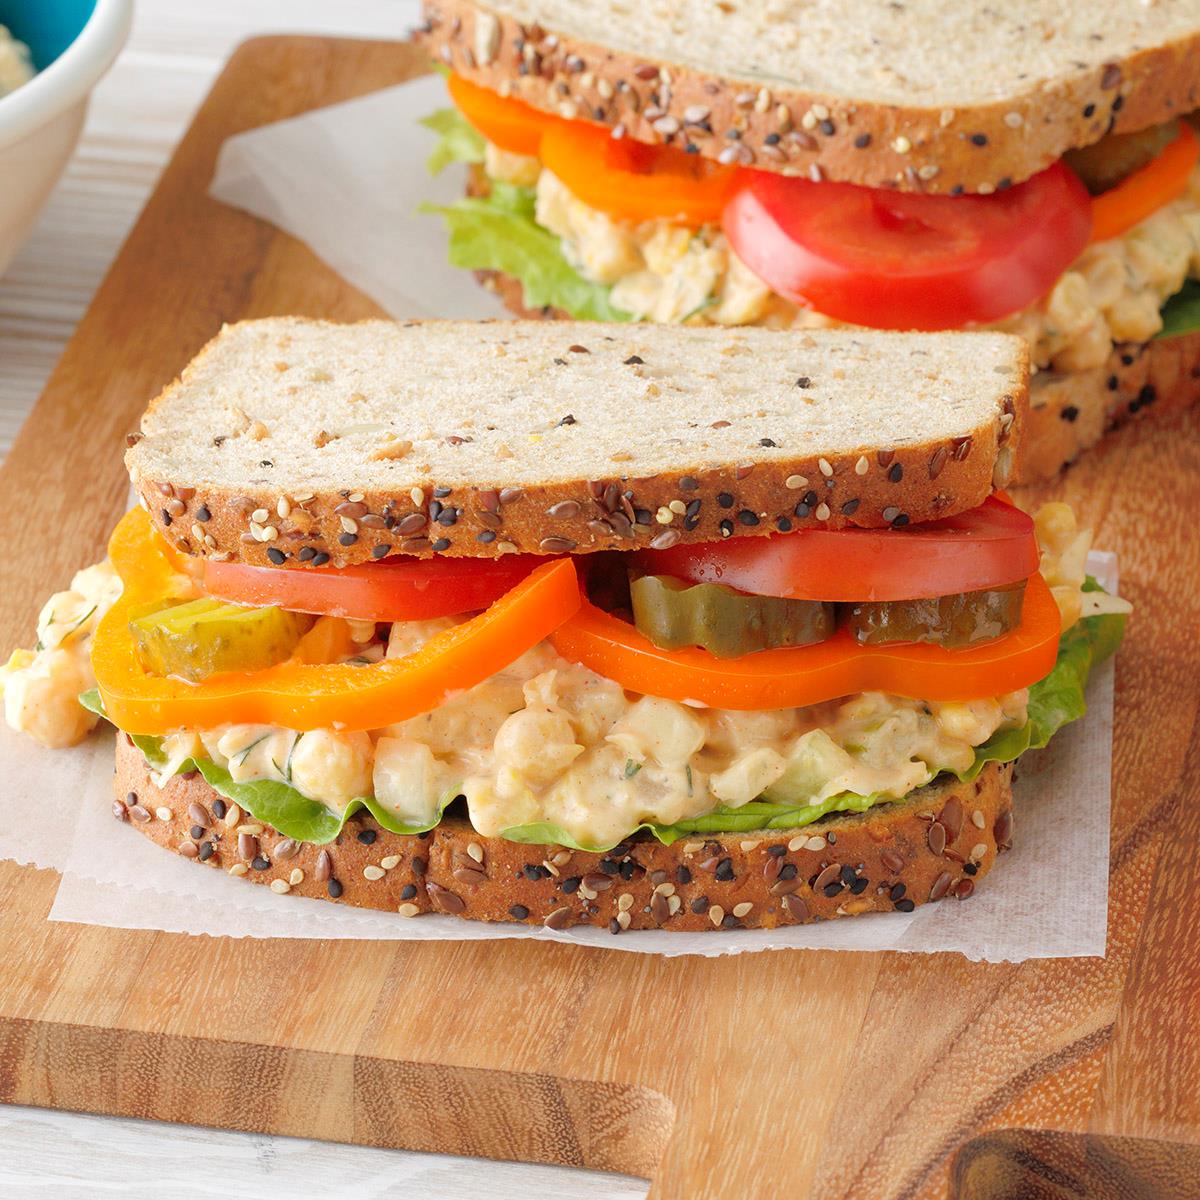 These chickpea salad sandwiches are super flavorful and contain less fat and cholesterol than chicken salad. They make delightful picnic sandwiches. —Deanna McDonald, Muskegon, Michigan <a href="https://www.tasteofhome.com/recipes/dilly-chickpea-salad-sandwiches/">Get Recipe</a>